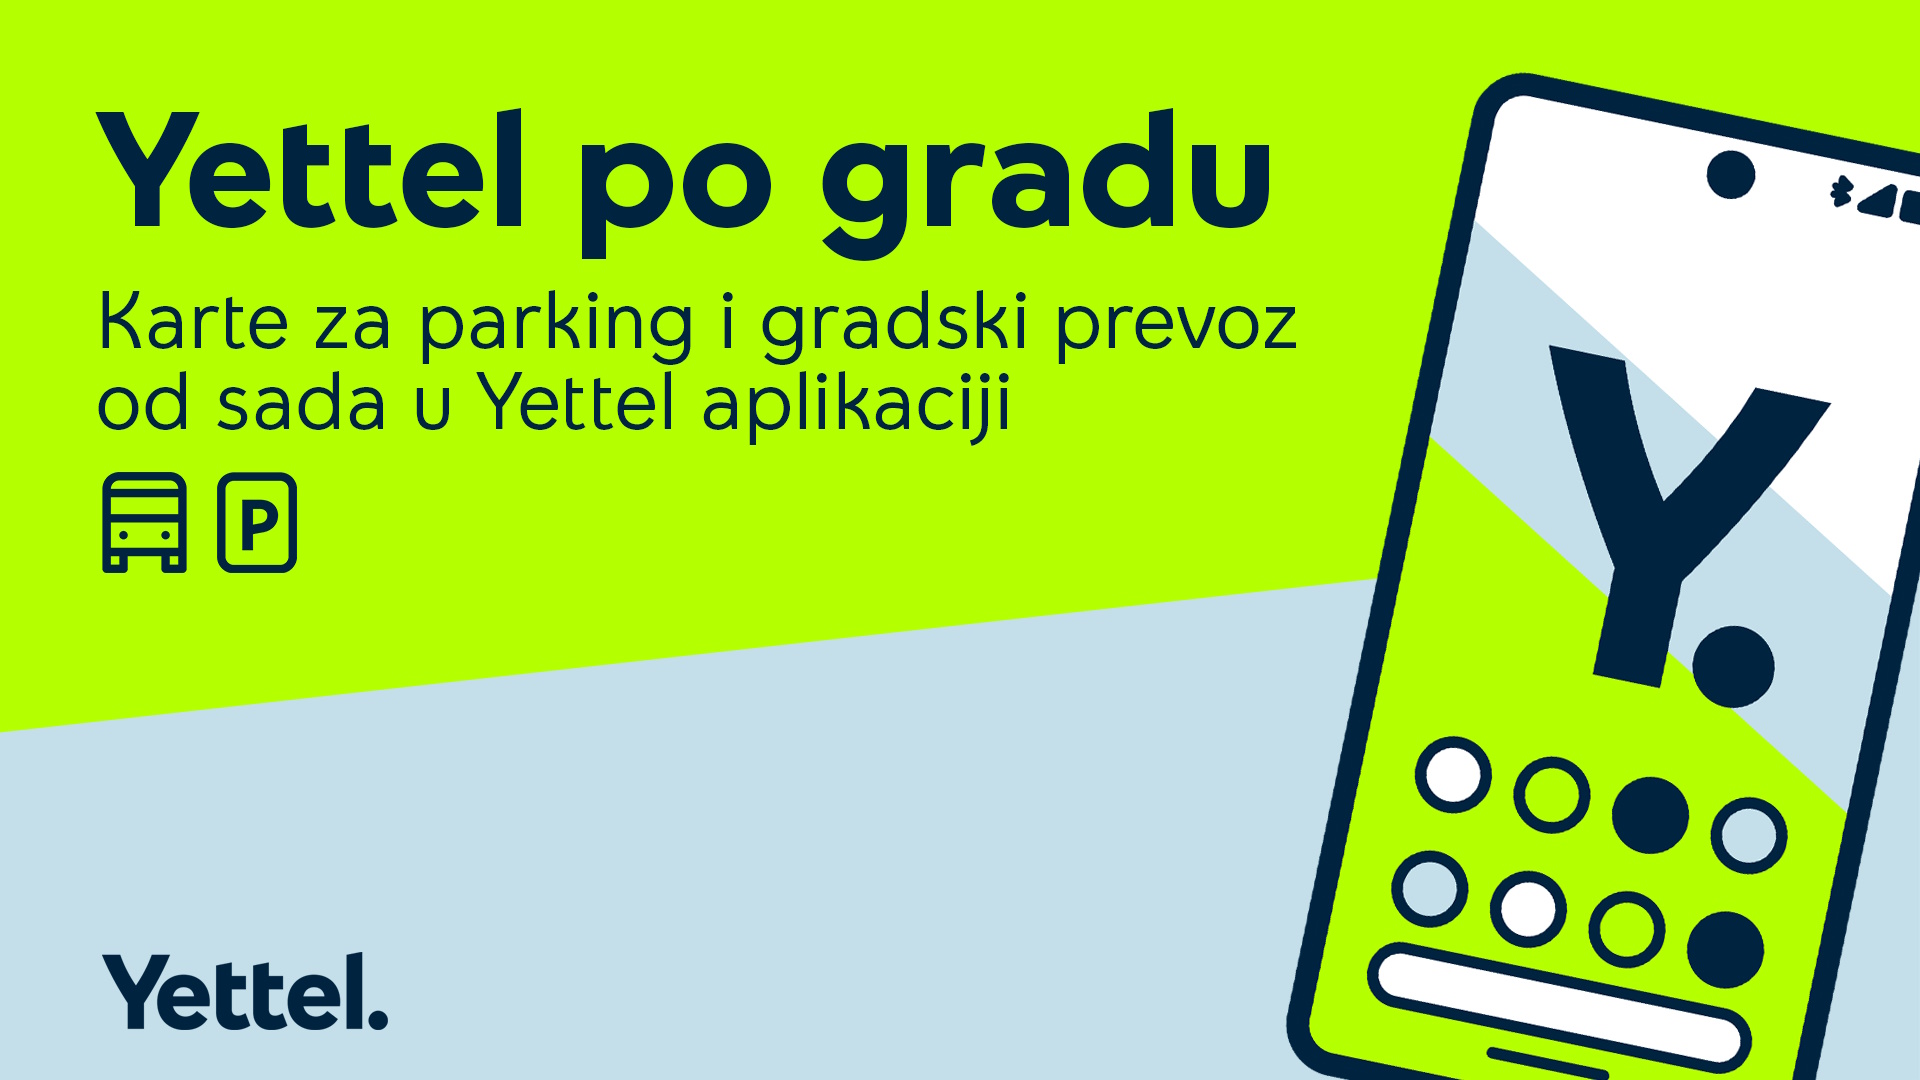 Payment for parking and public transport in the Yettel application